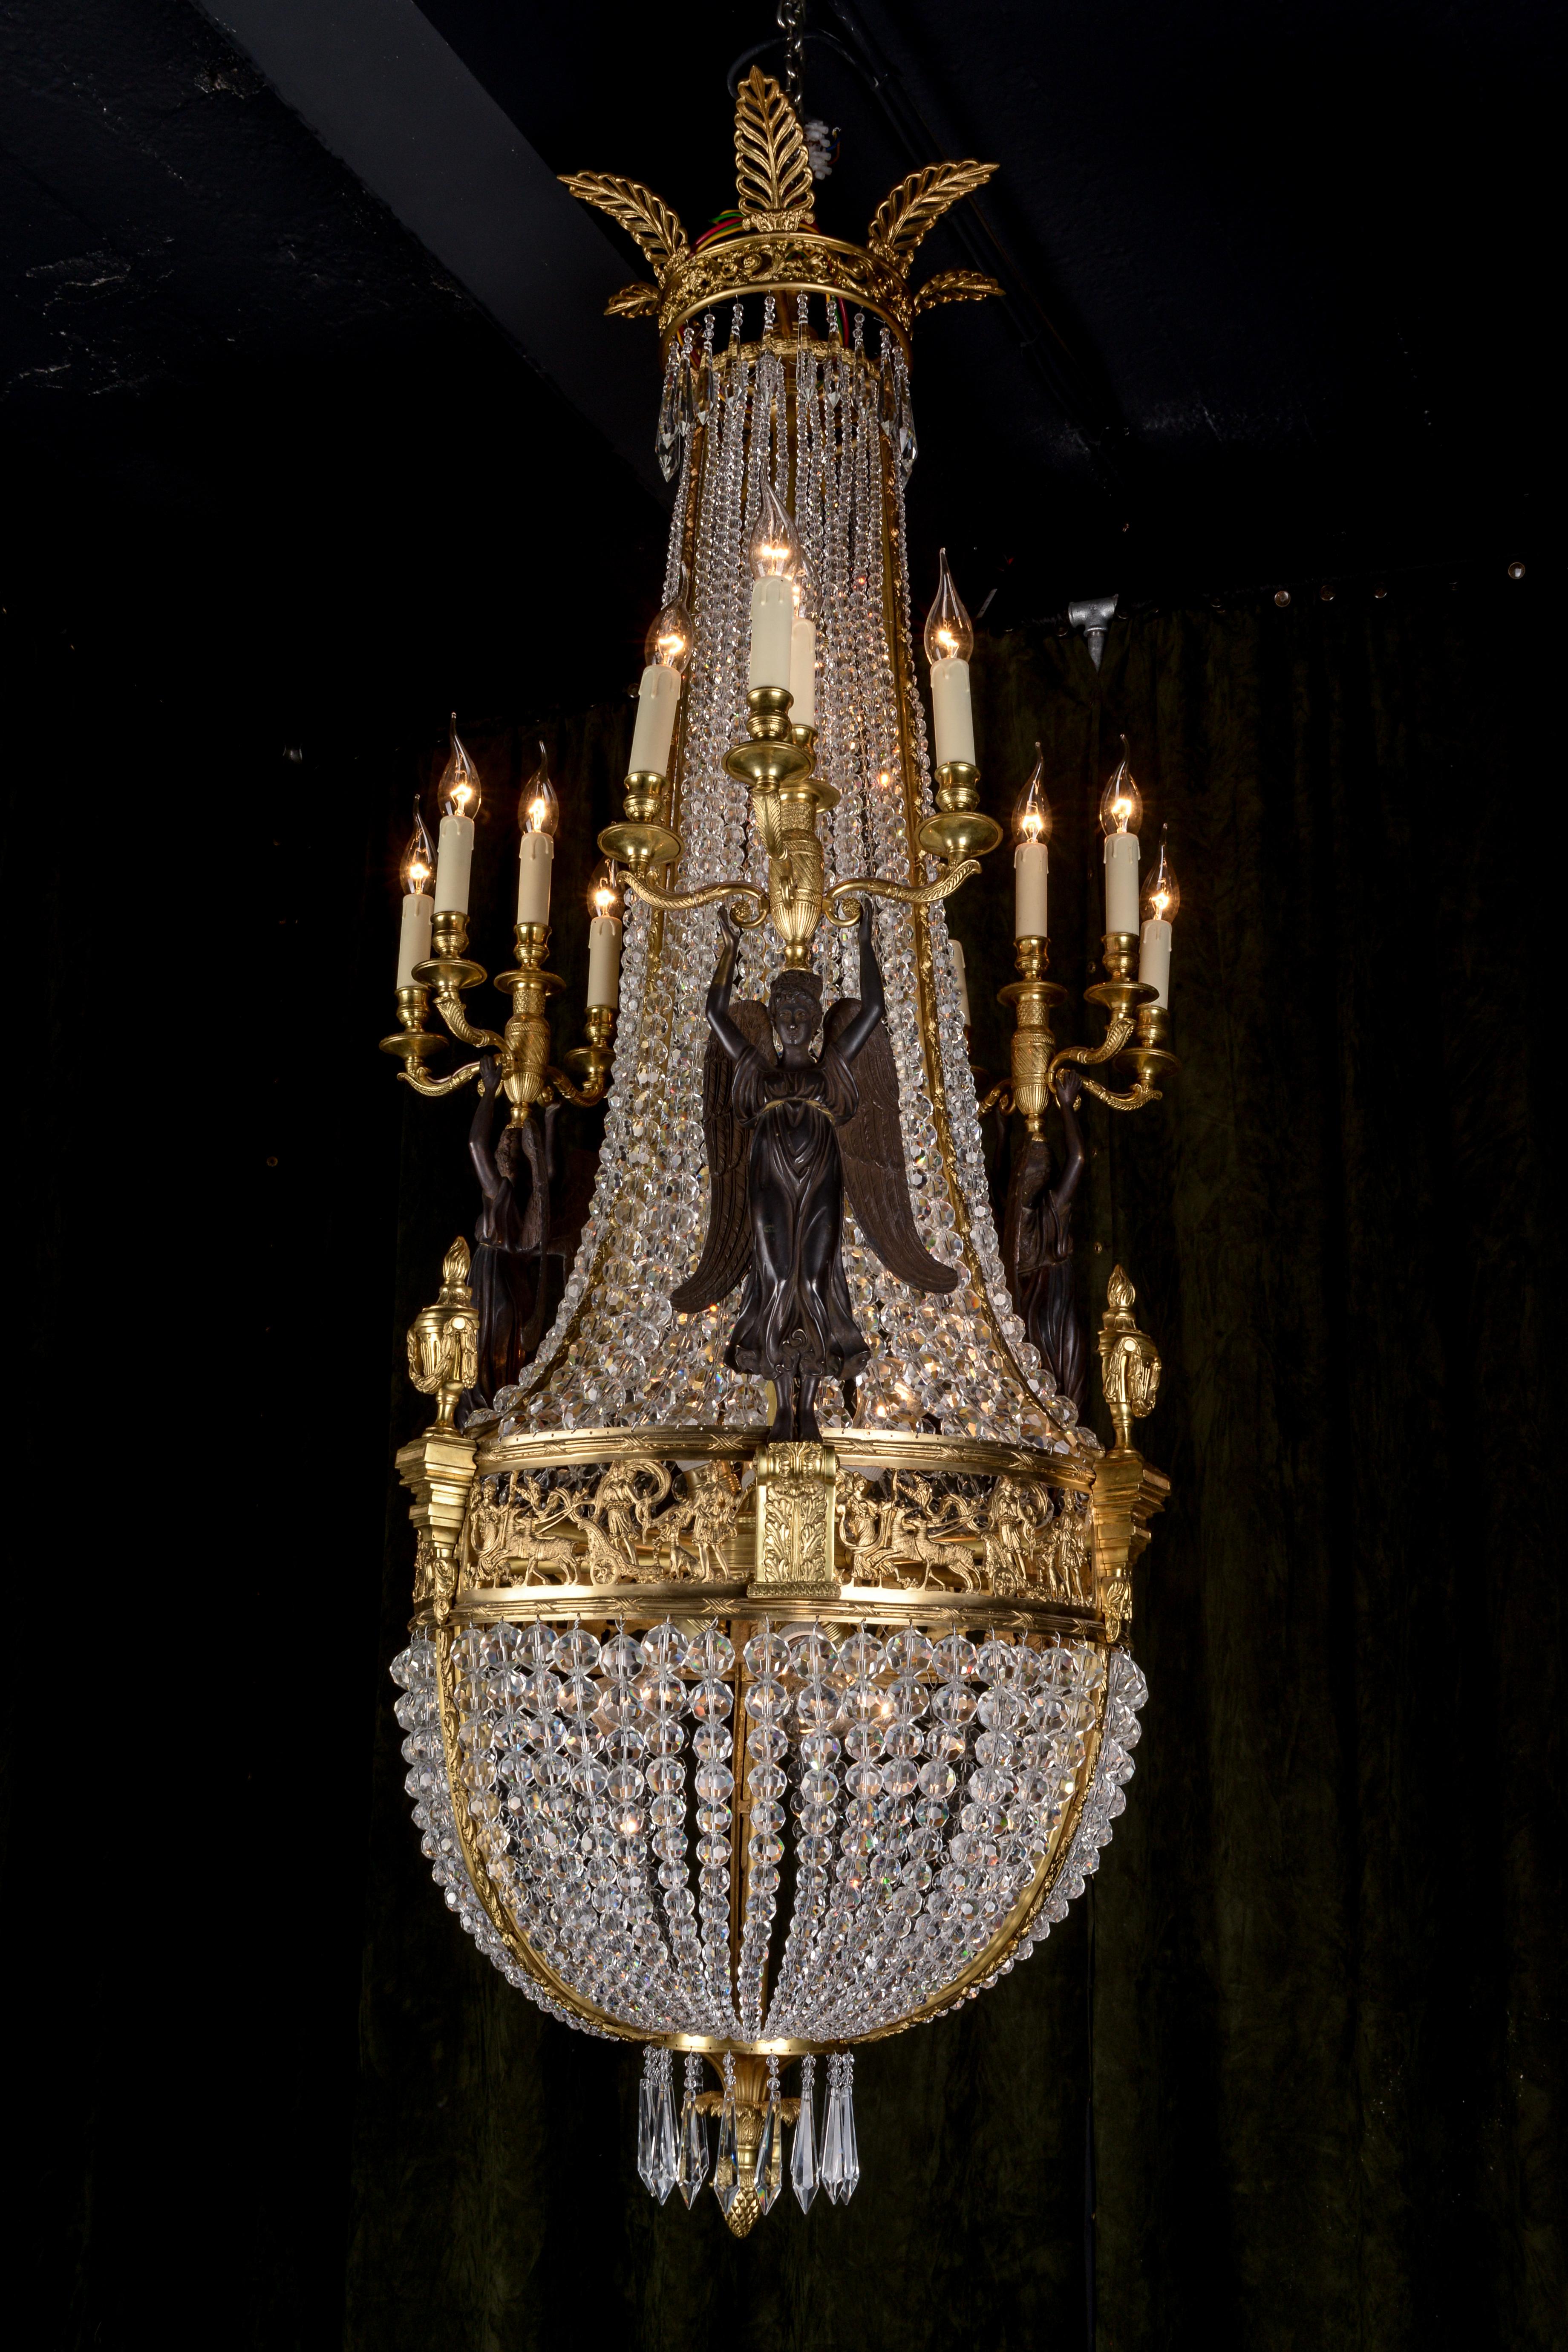 Splendid chandelier after Pierre Phillipe Thomire (1751 – 1843).

Exceptionally fine, engraved and cast Bronze. Basket-formed corpus from hand-cut frenches ball prisms (over 3,600 pieces). Connected through wide, ornamental reliefed and broken